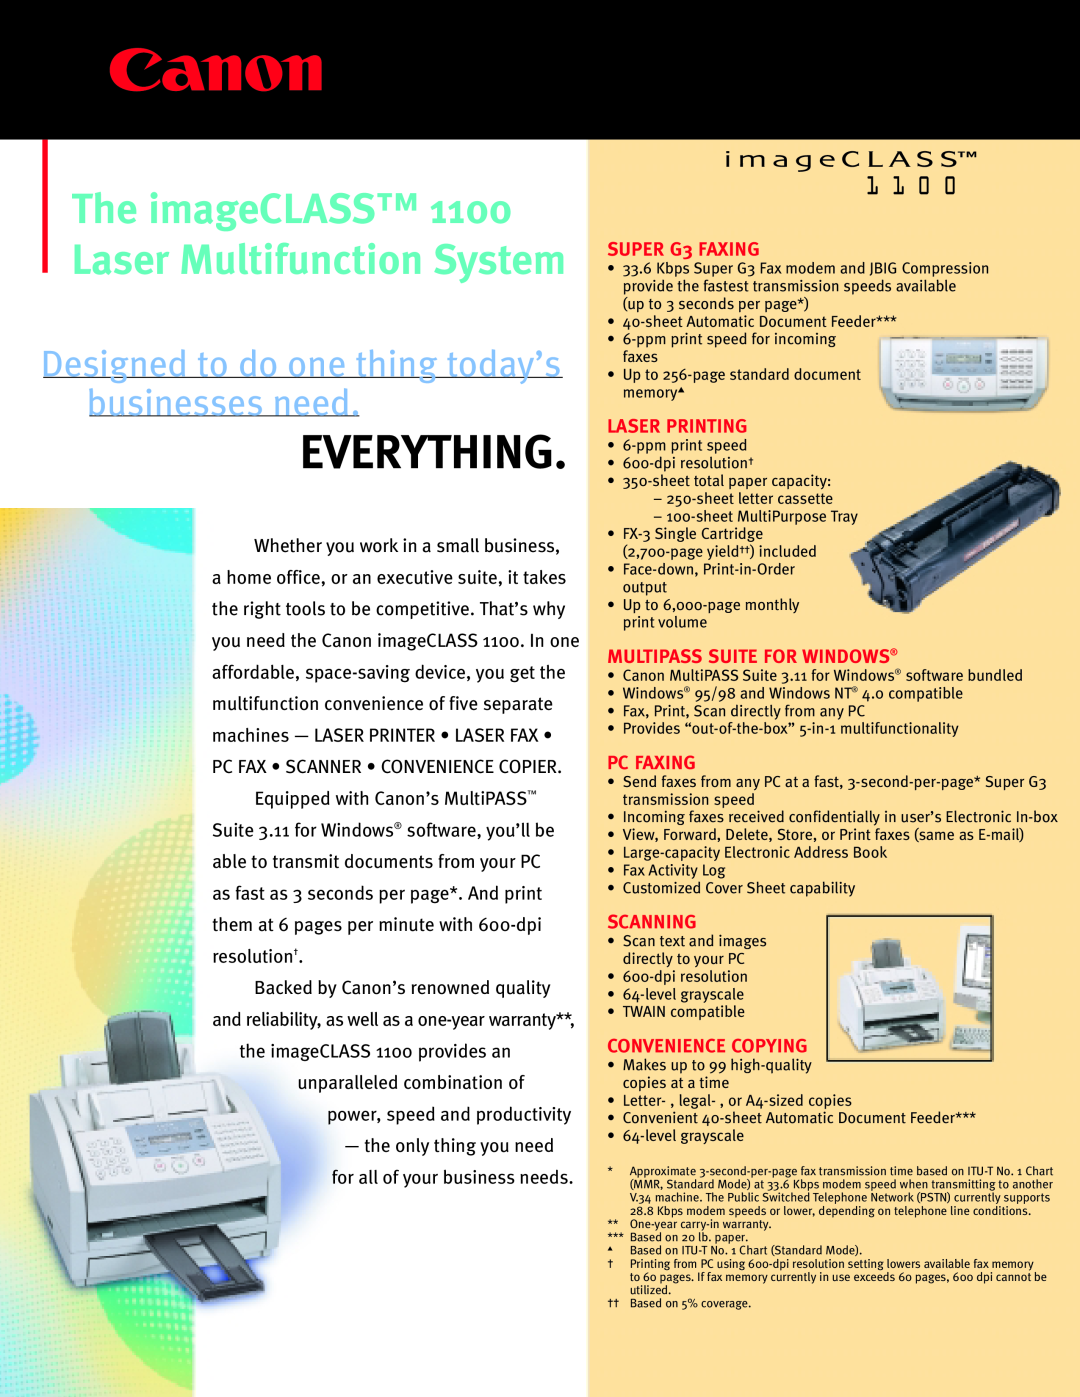 Canon warranty Everything, The imageCLASS 1100 Laser Multifunction System, SUPER G3 FAXING, Laser Printing, Pc Faxing 